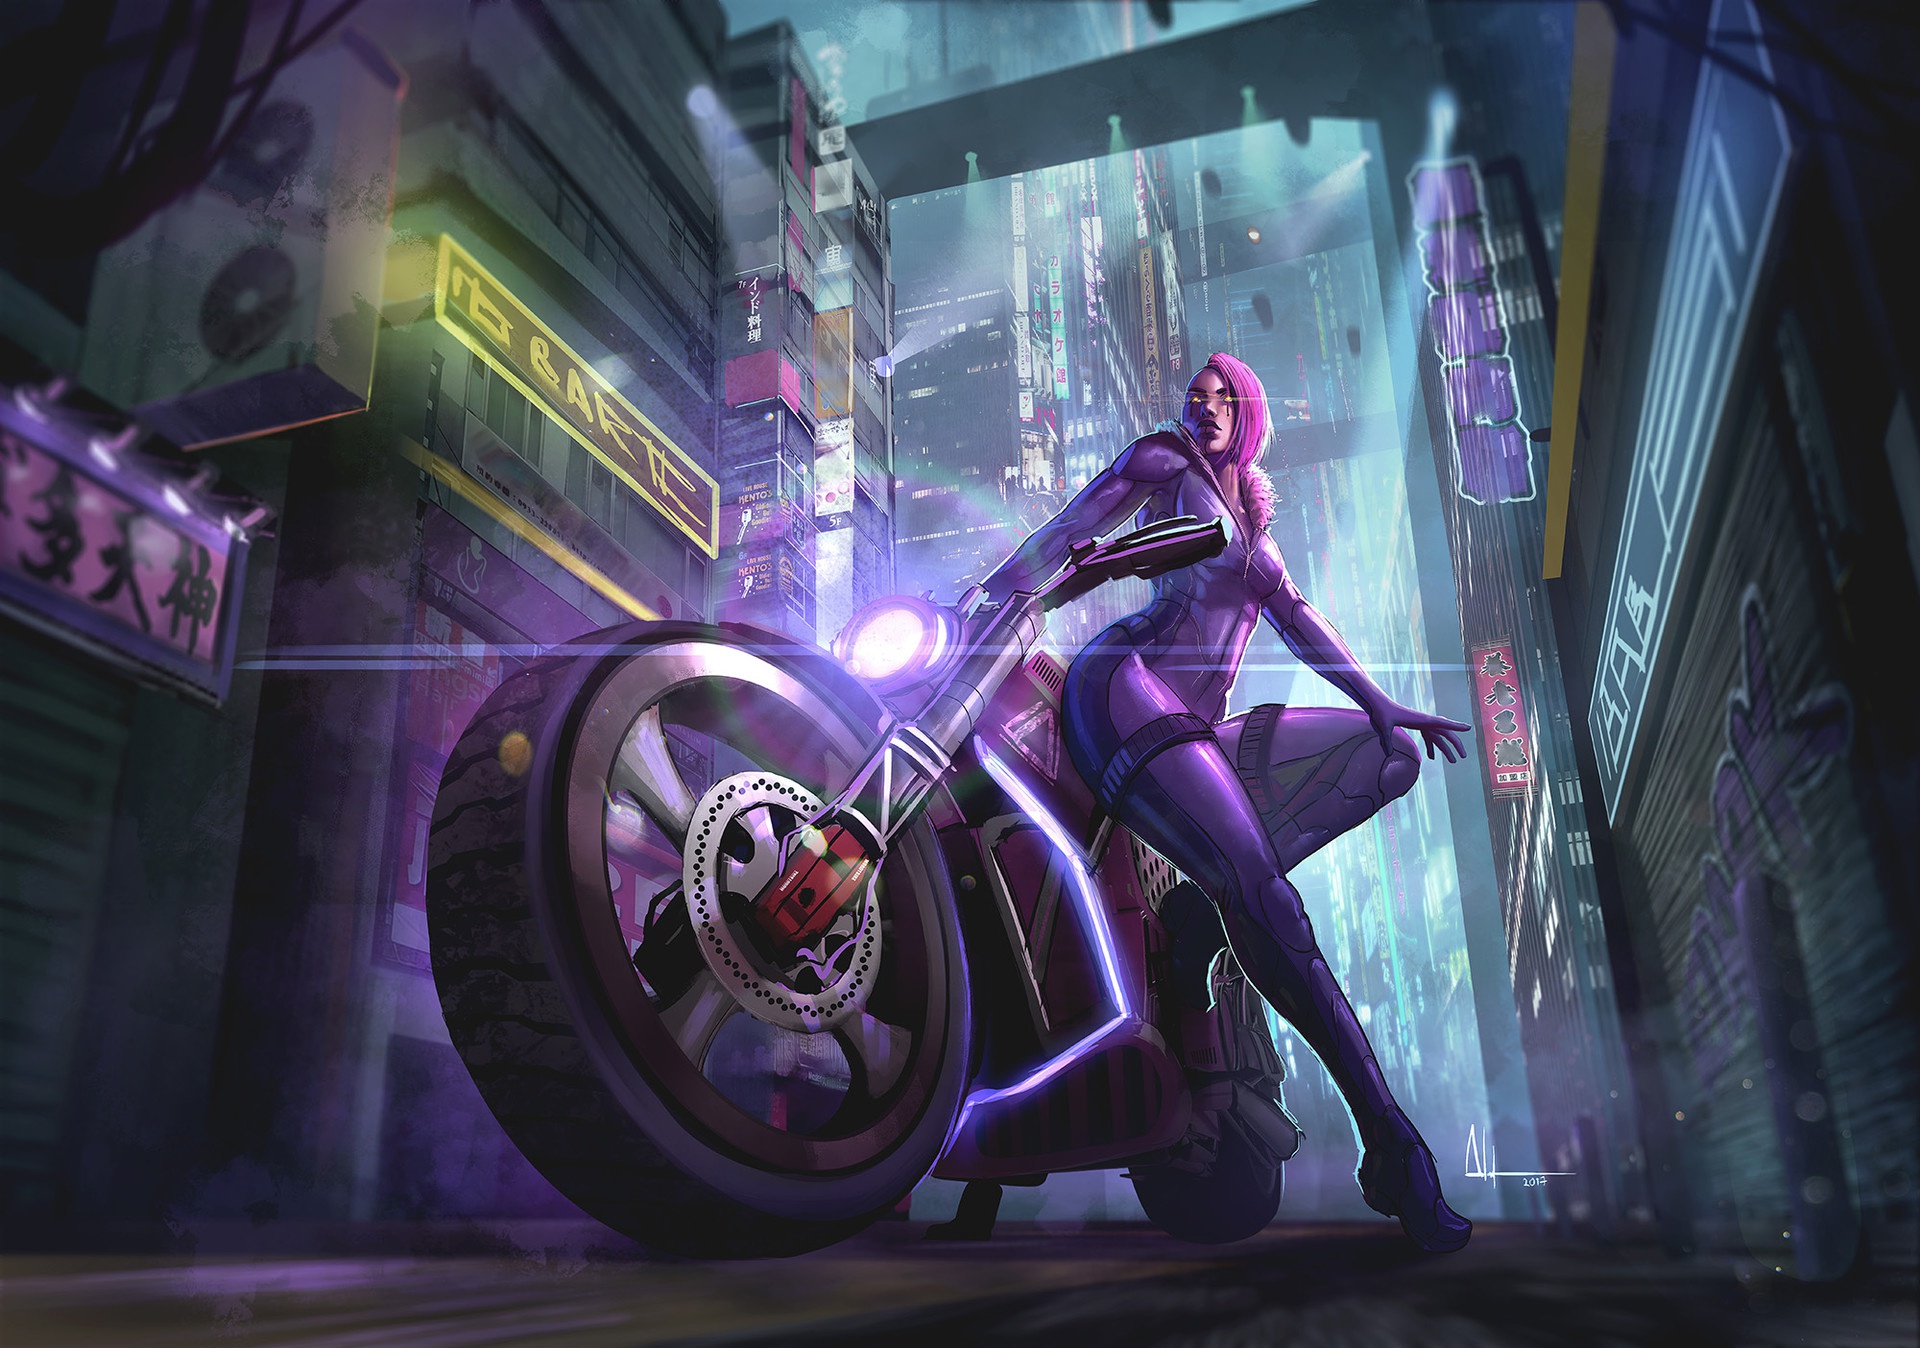 General 1920x1348 vehicle futuristic city futuristic women artwork motorcycle women with motorcycles